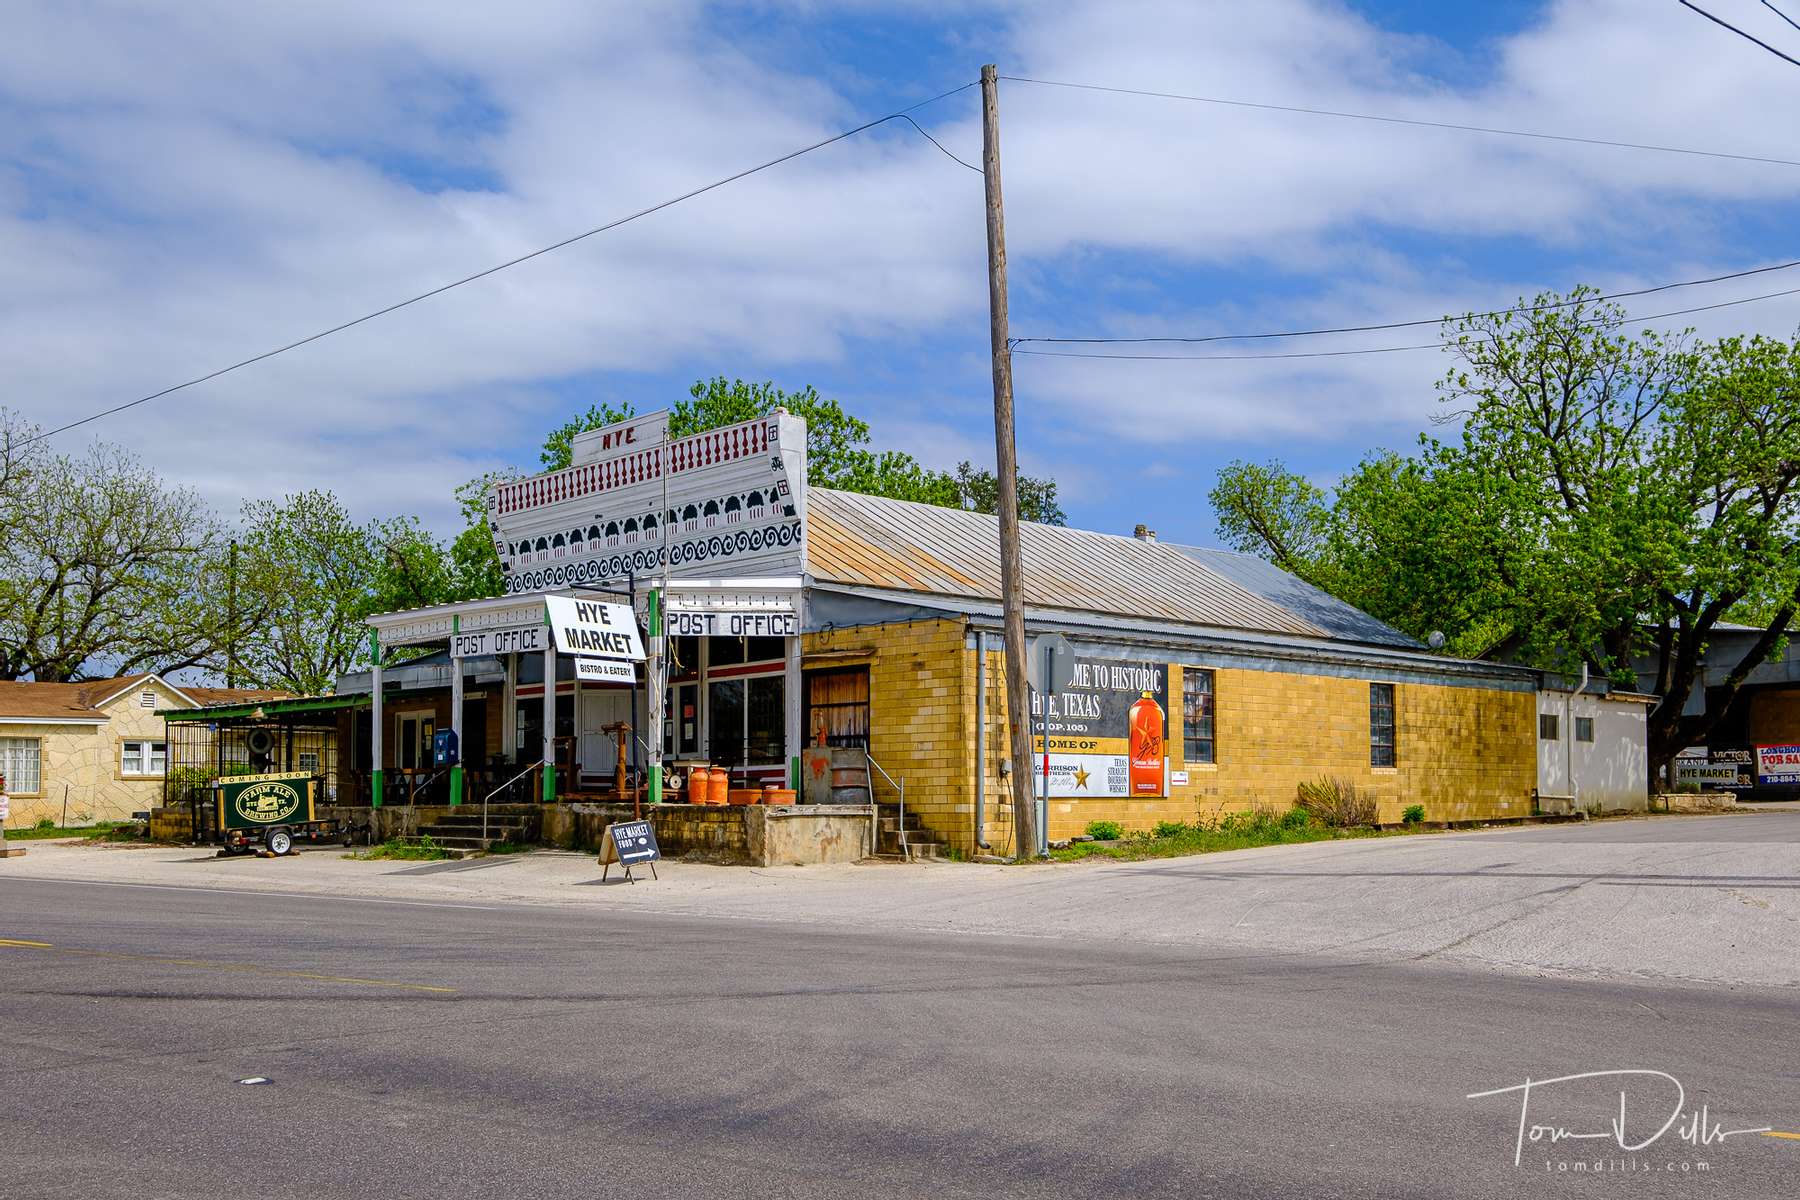 Post Office and General Store in Hye, Texas